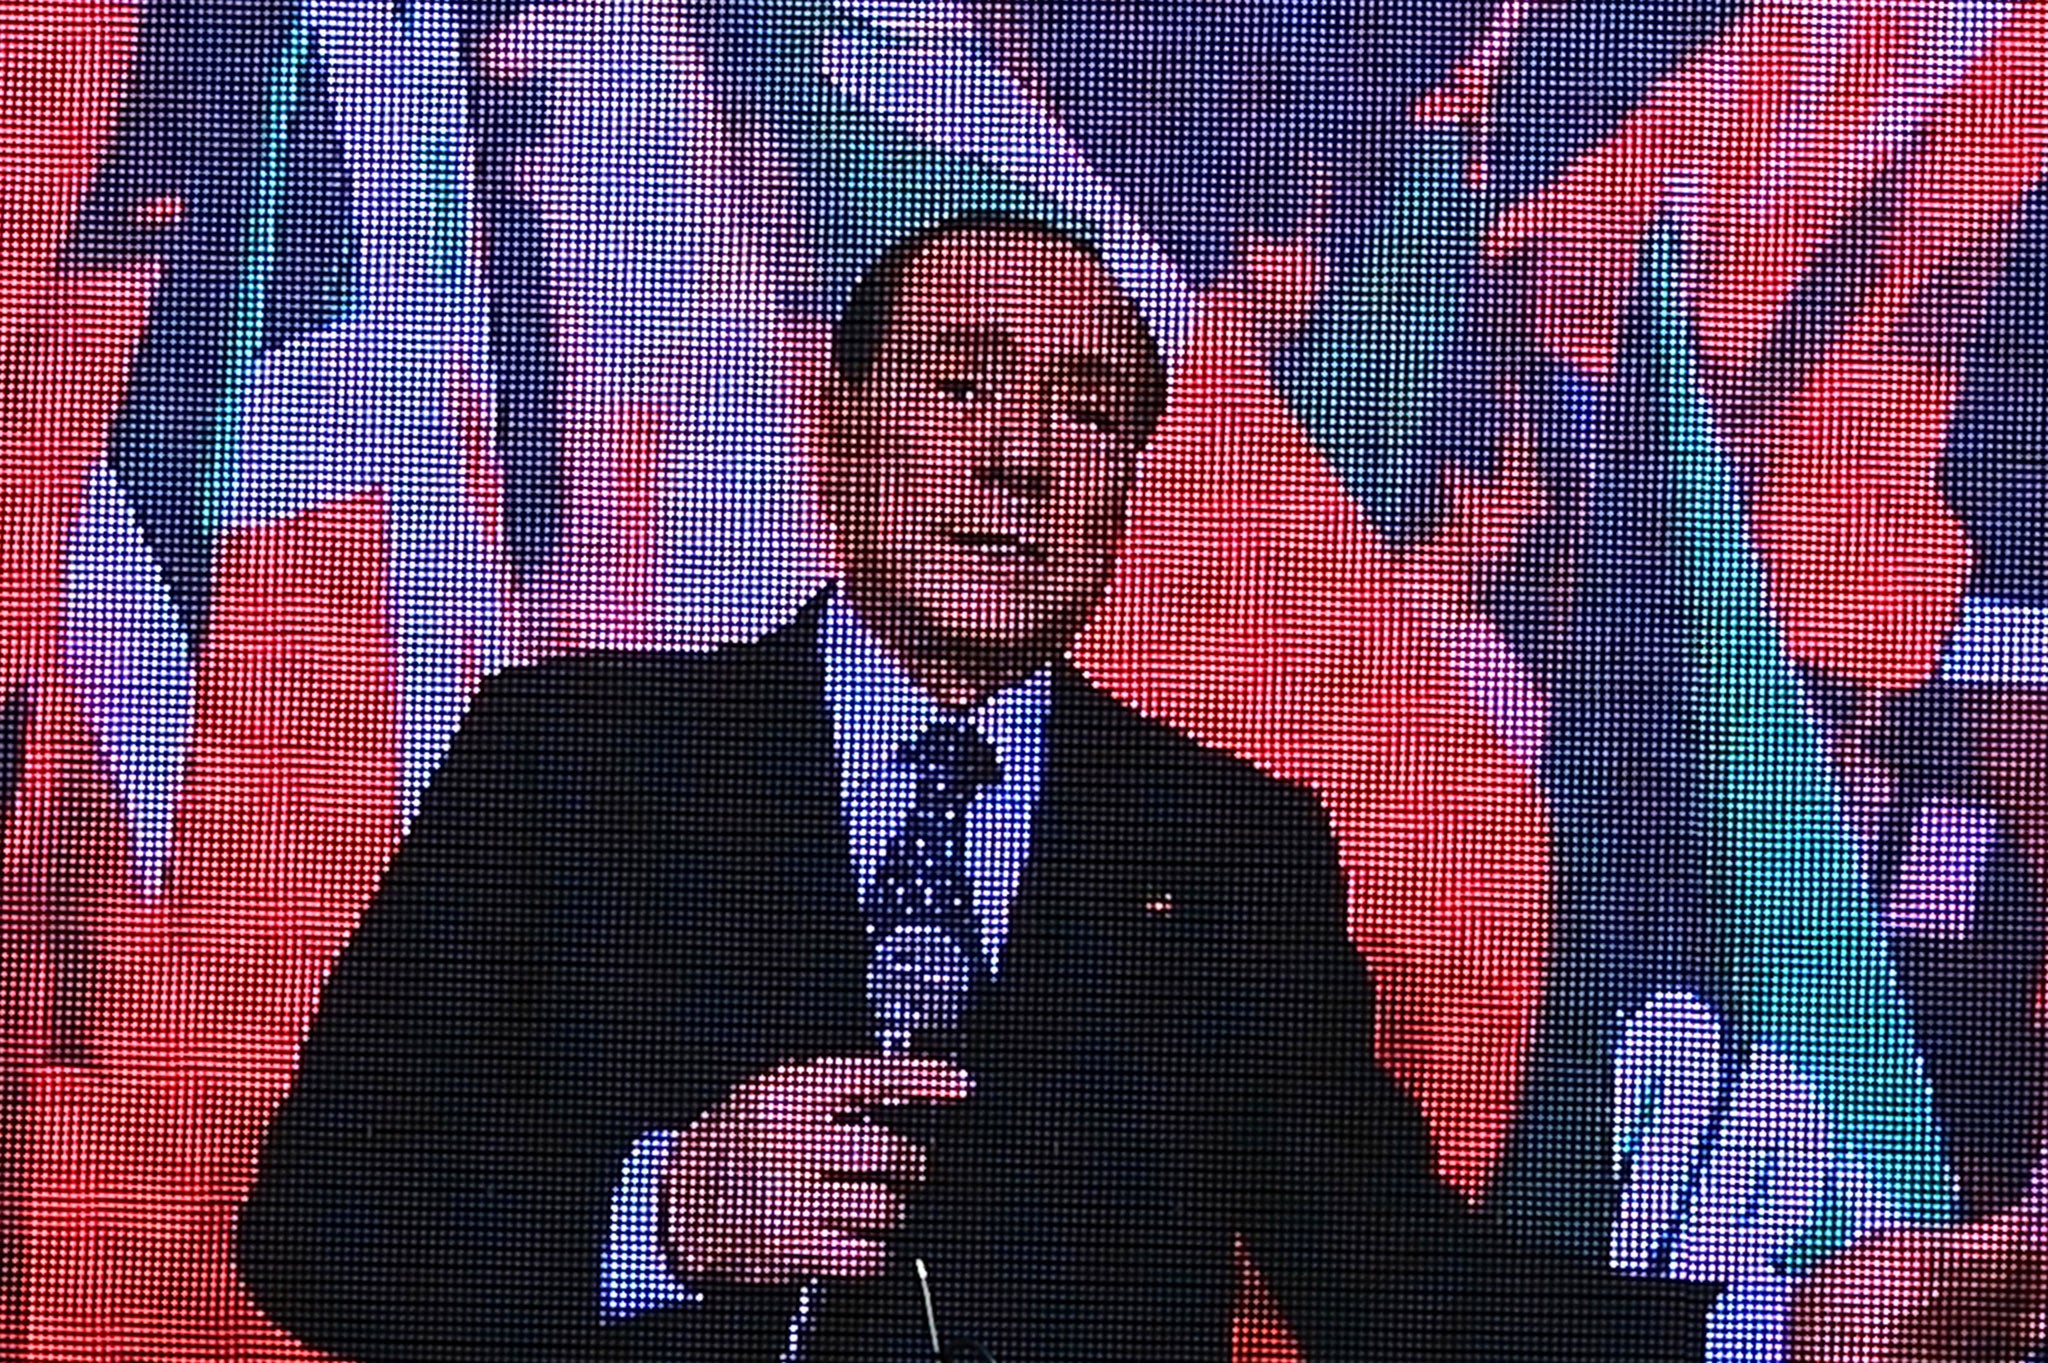 Berlusconi’s ‘distressing’ TV appearance yesterday